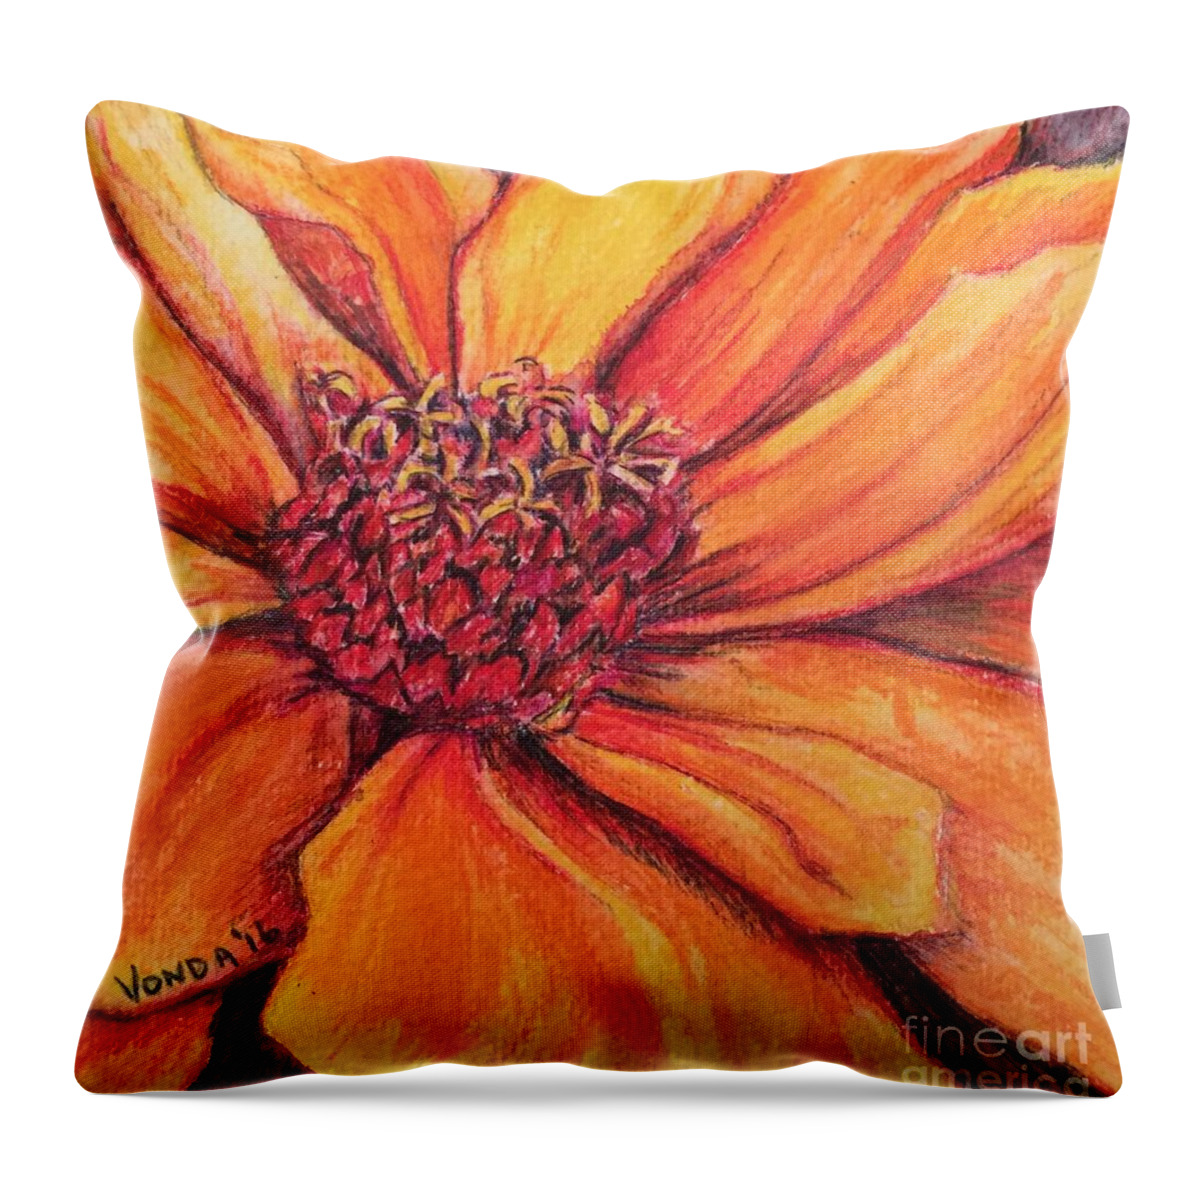 Macro Throw Pillow featuring the drawing Sunny Perspective by Vonda Lawson-Rosa